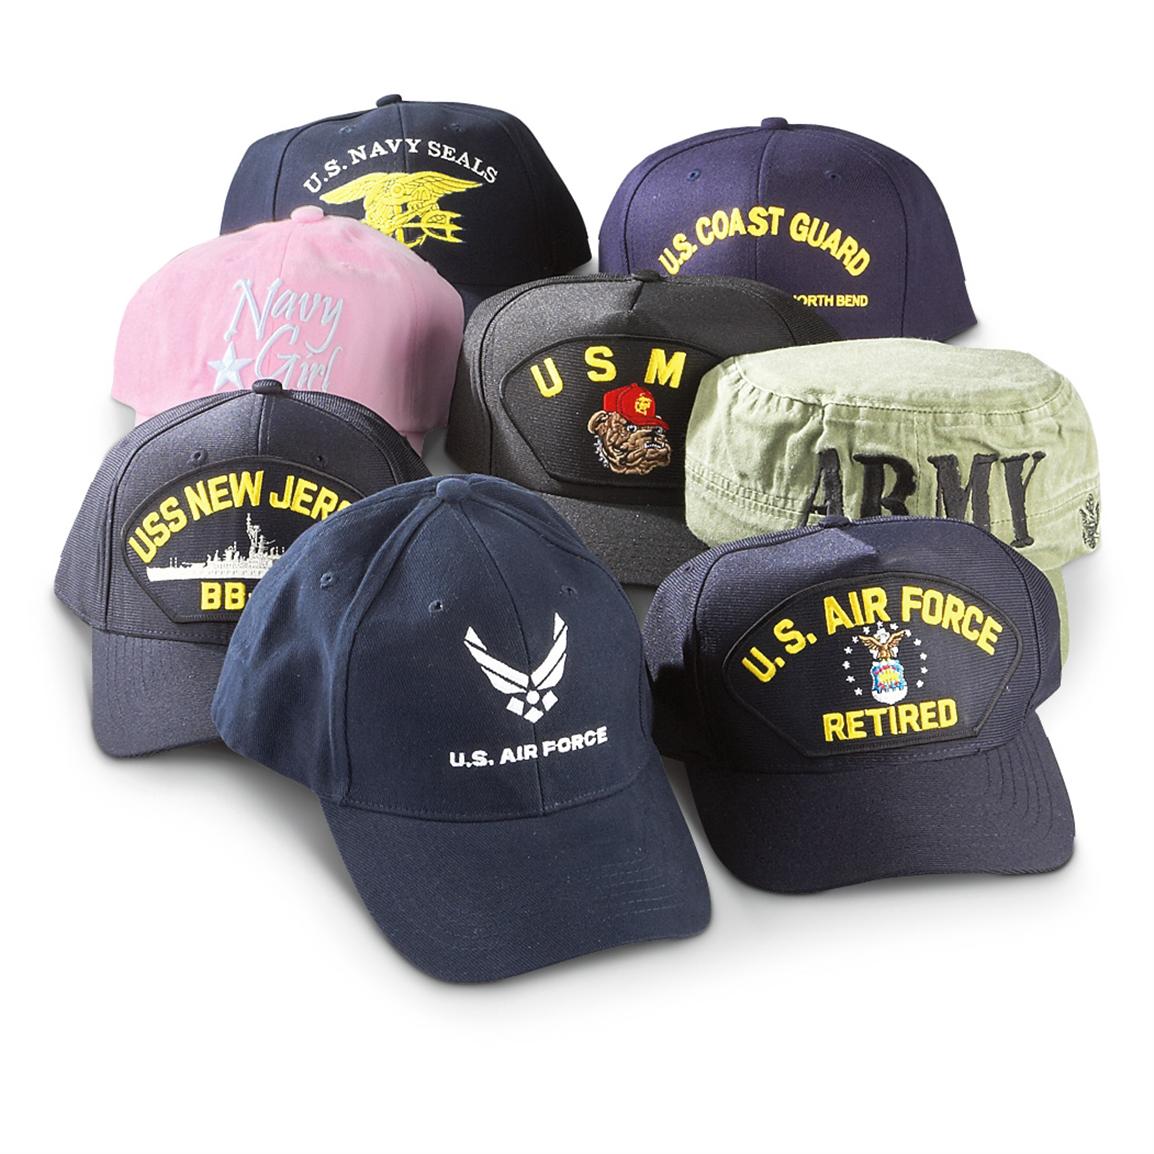 8-pk-of-military-ball-caps-222003-hats-caps-at-sportsman-s-guide